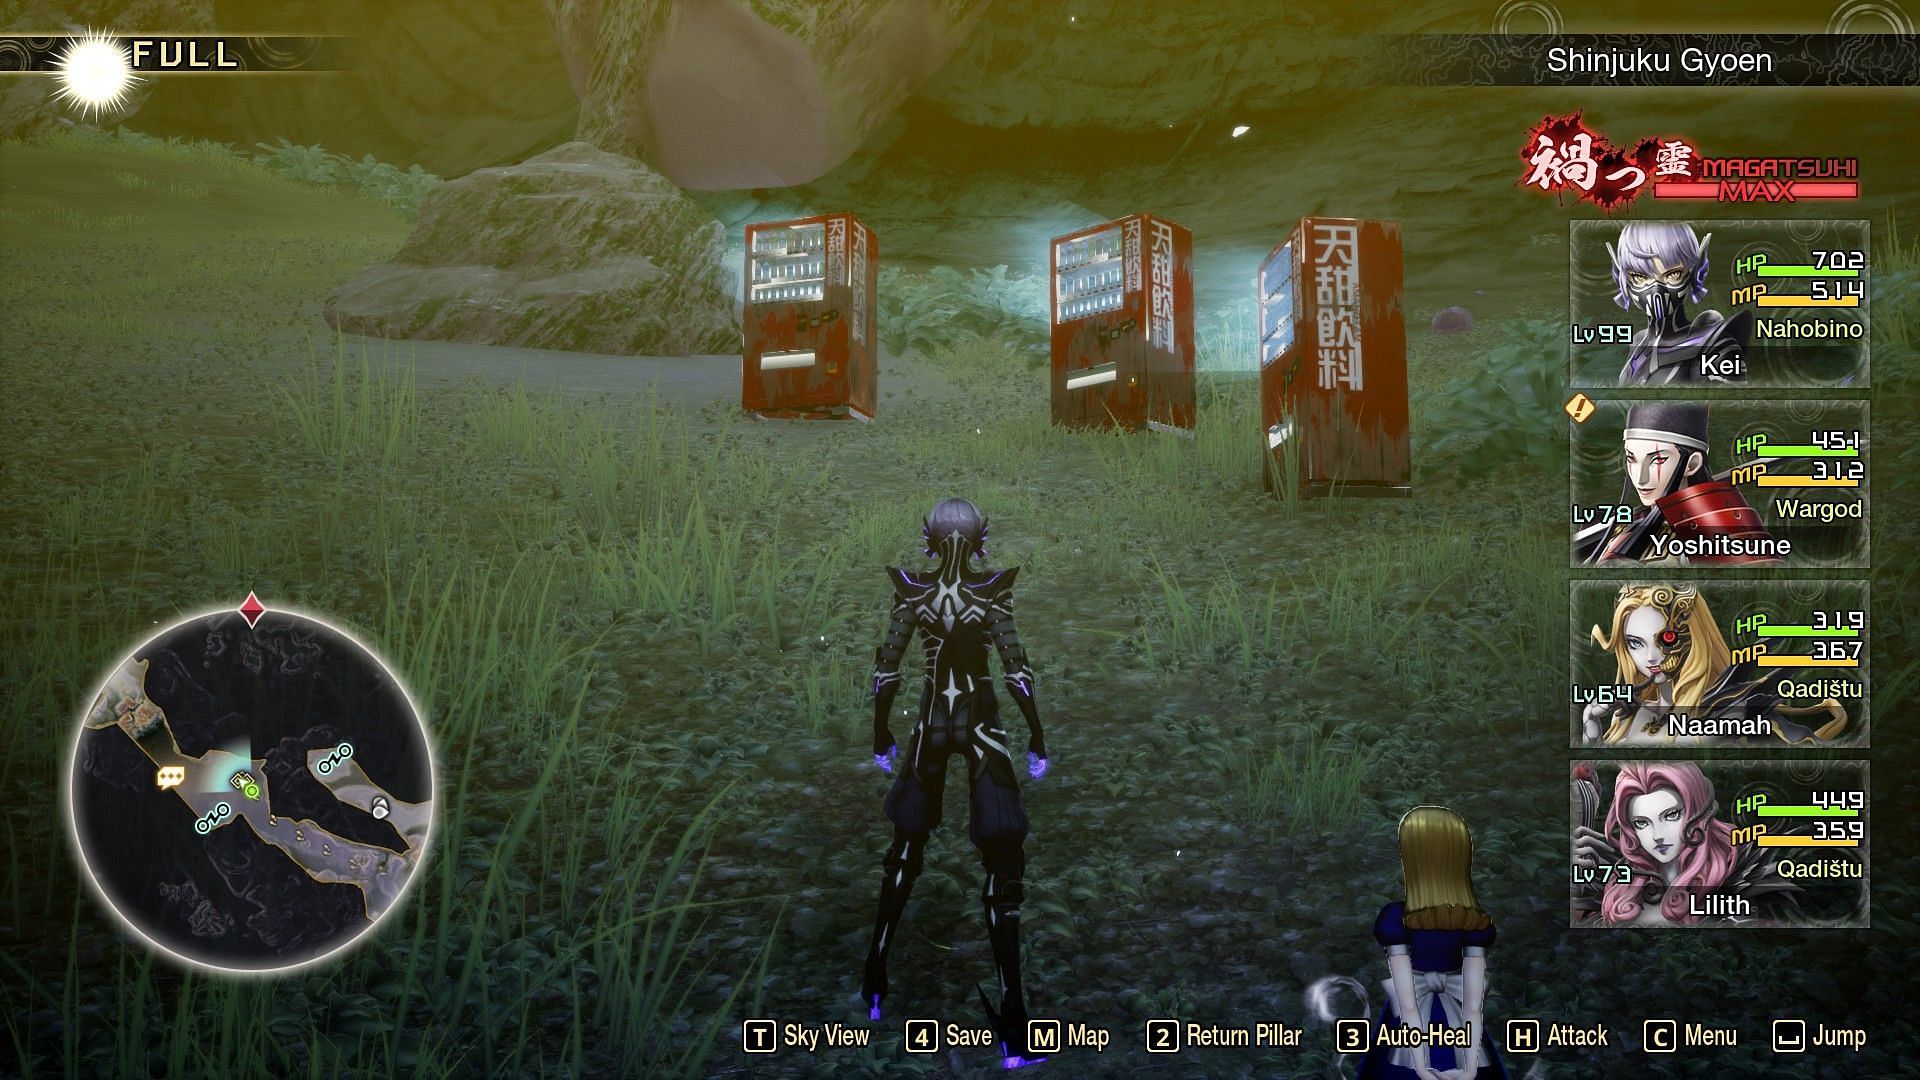 These rusty old vending machines drop Relics that can be sold for Macca (Image via Atlus)